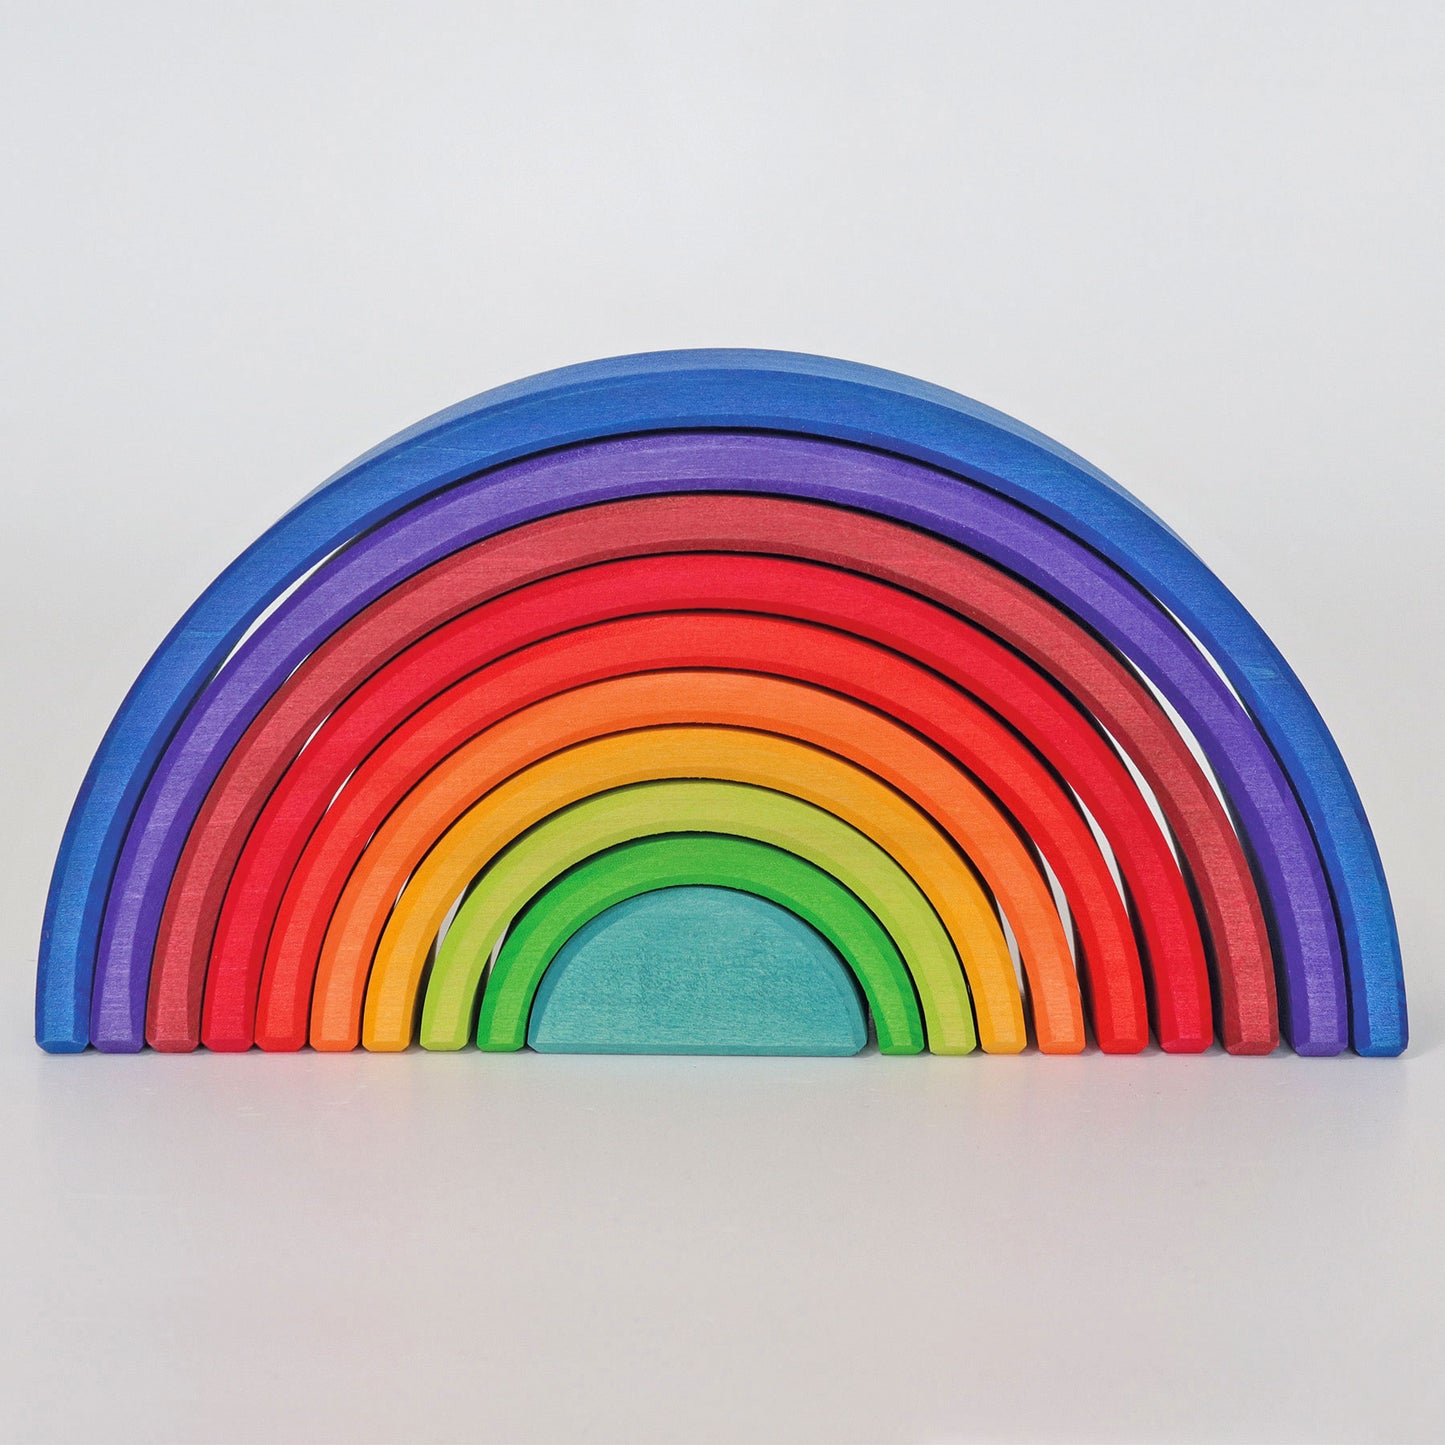 Grimm's - Large Counting Rainbow (10 Pieces)